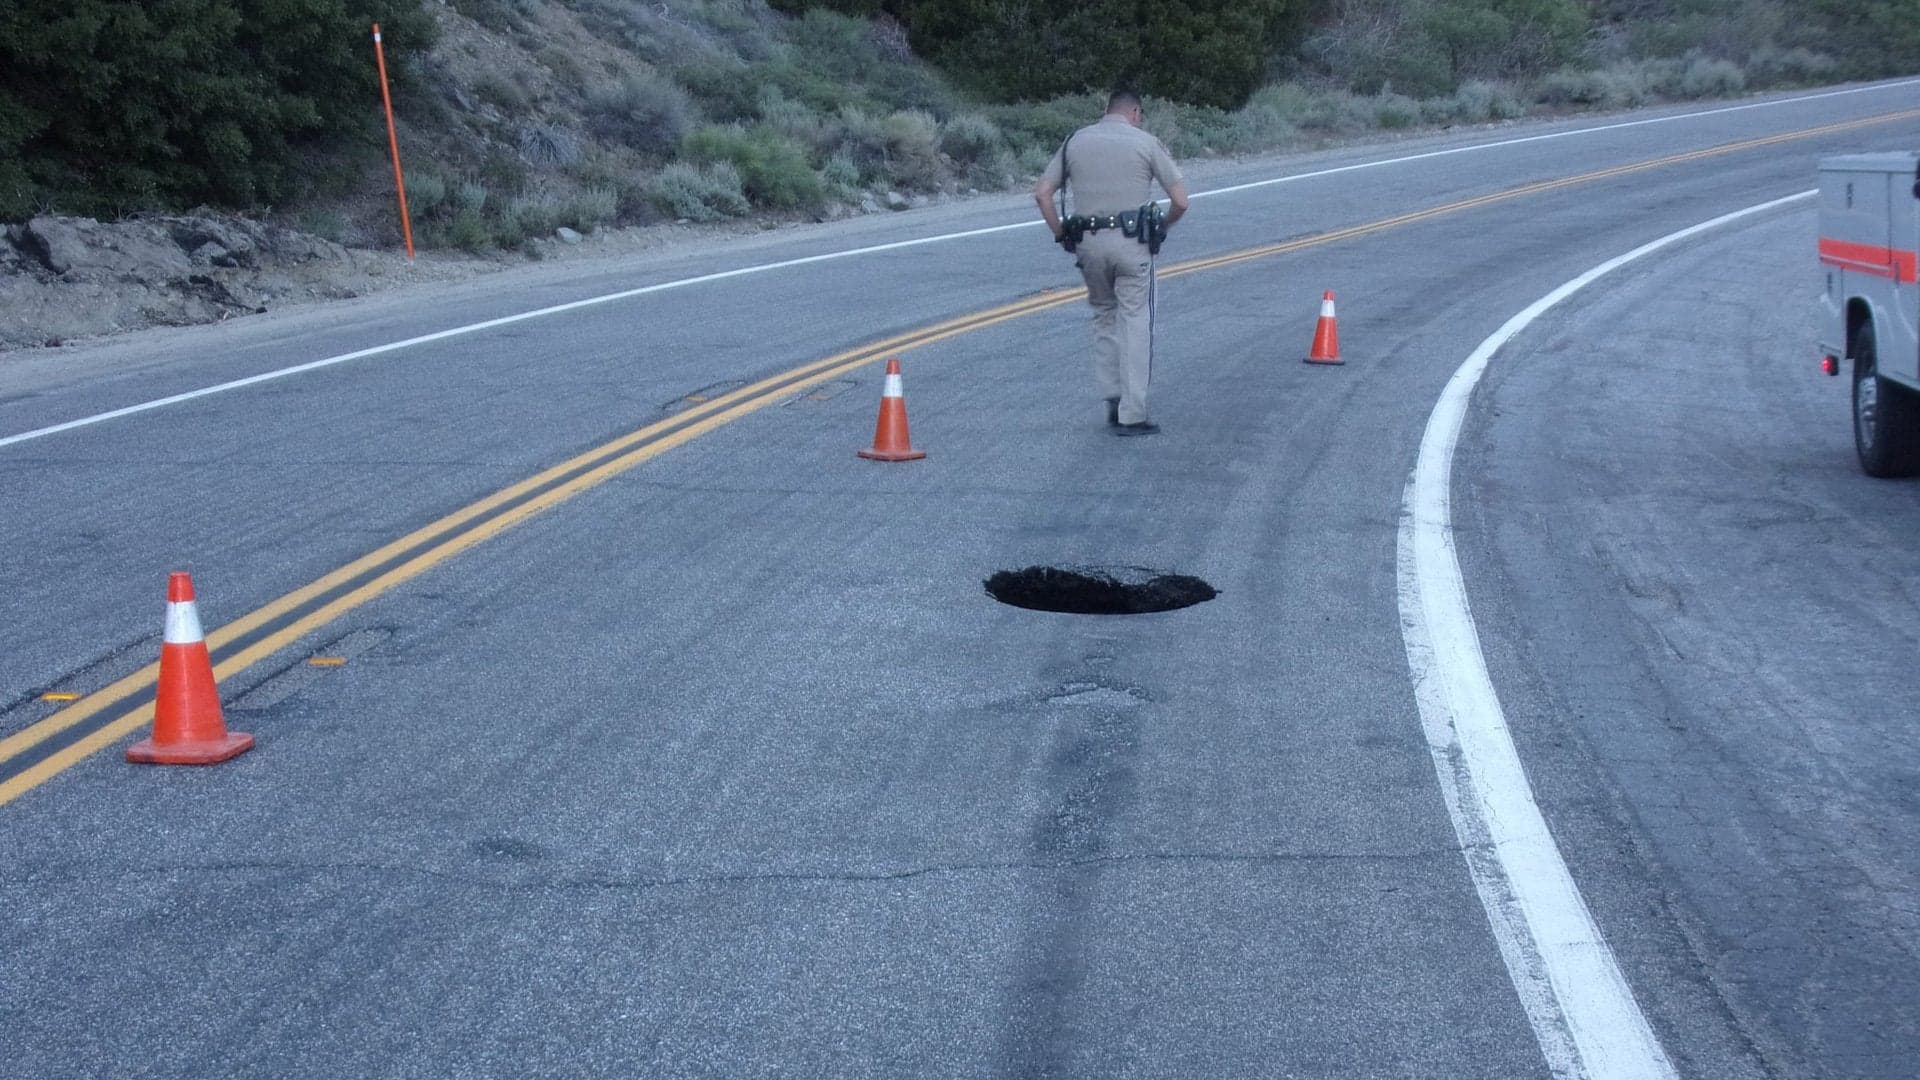 Angeles Crest Highway Closed Due to Sinkhole